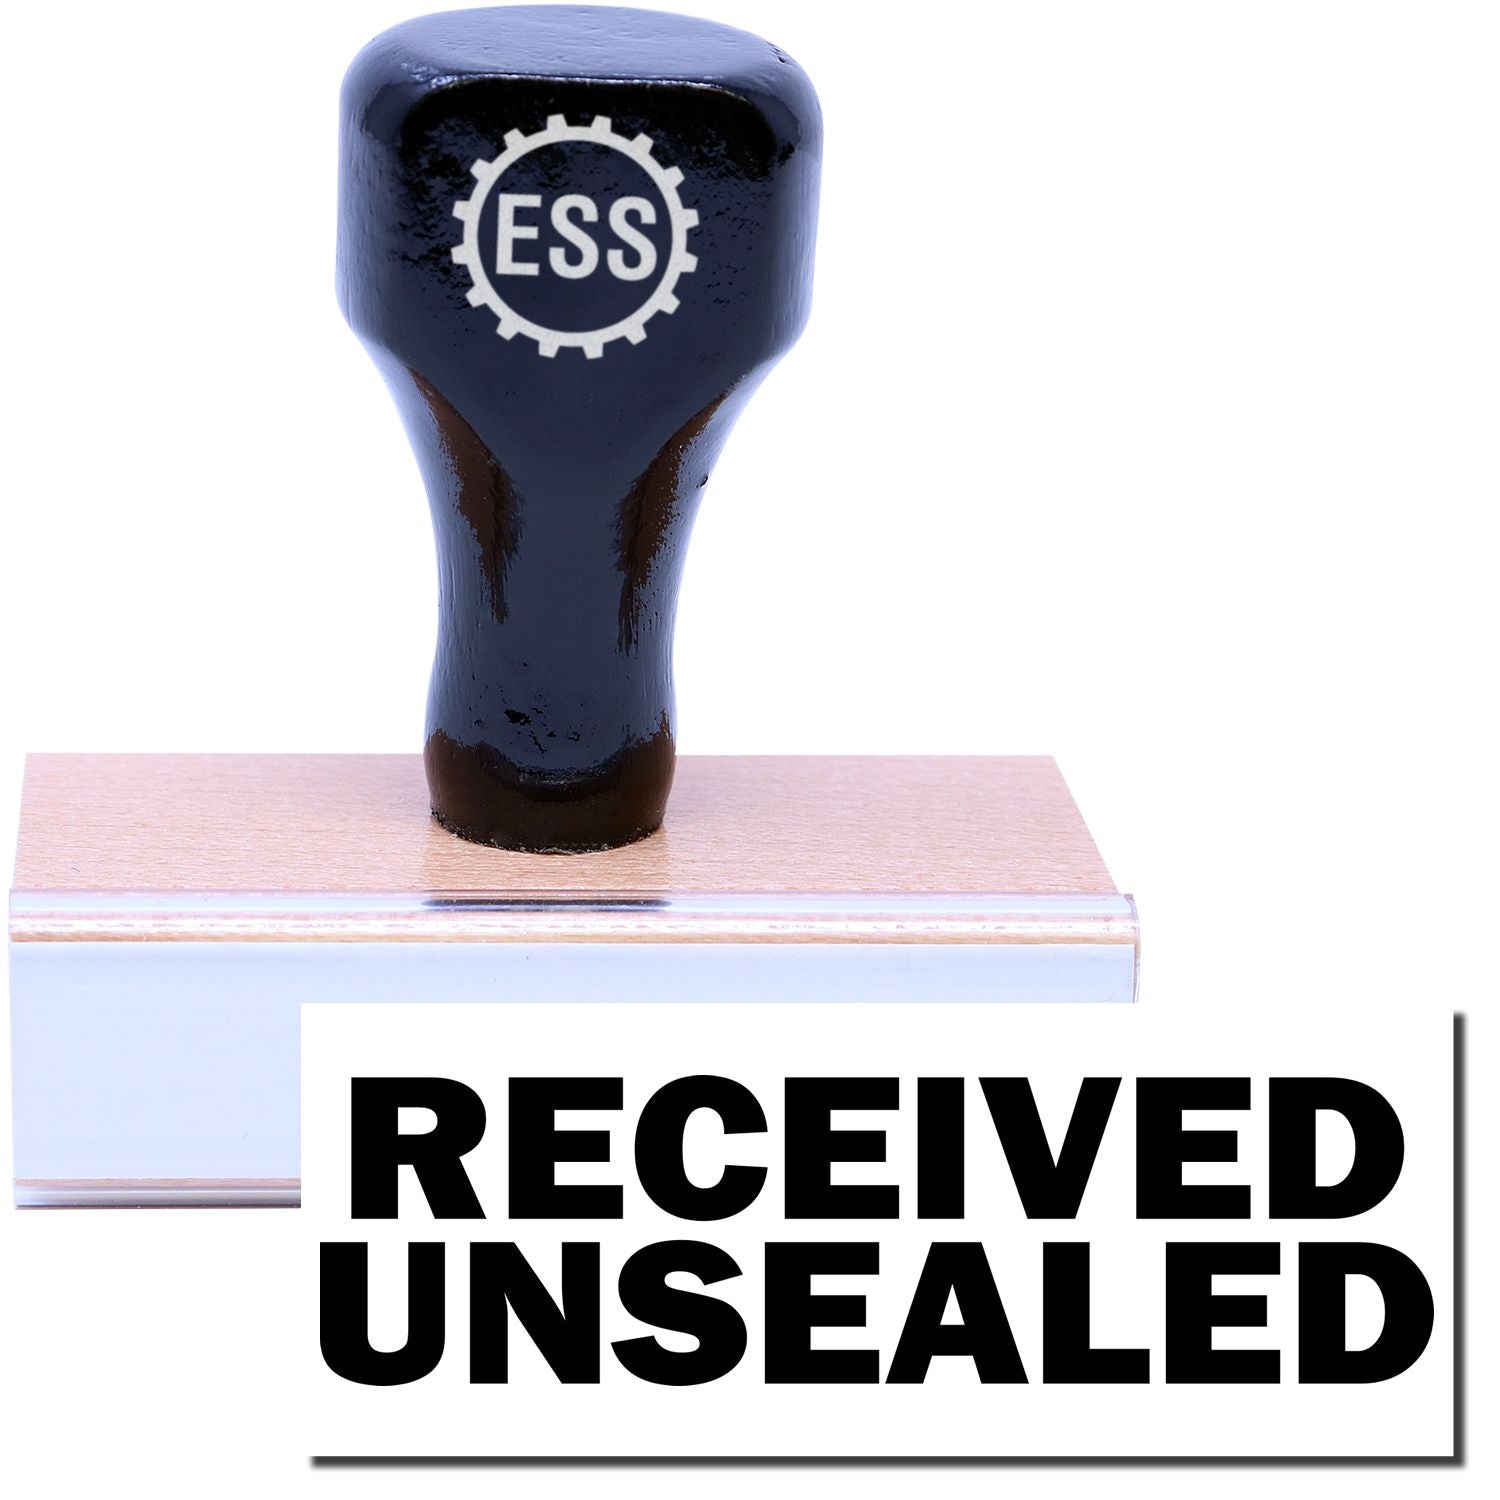 A stock office rubber stamp with a stamped image showing how the text "RECEIVED UNSEALED" in a large font is displayed after stamping.